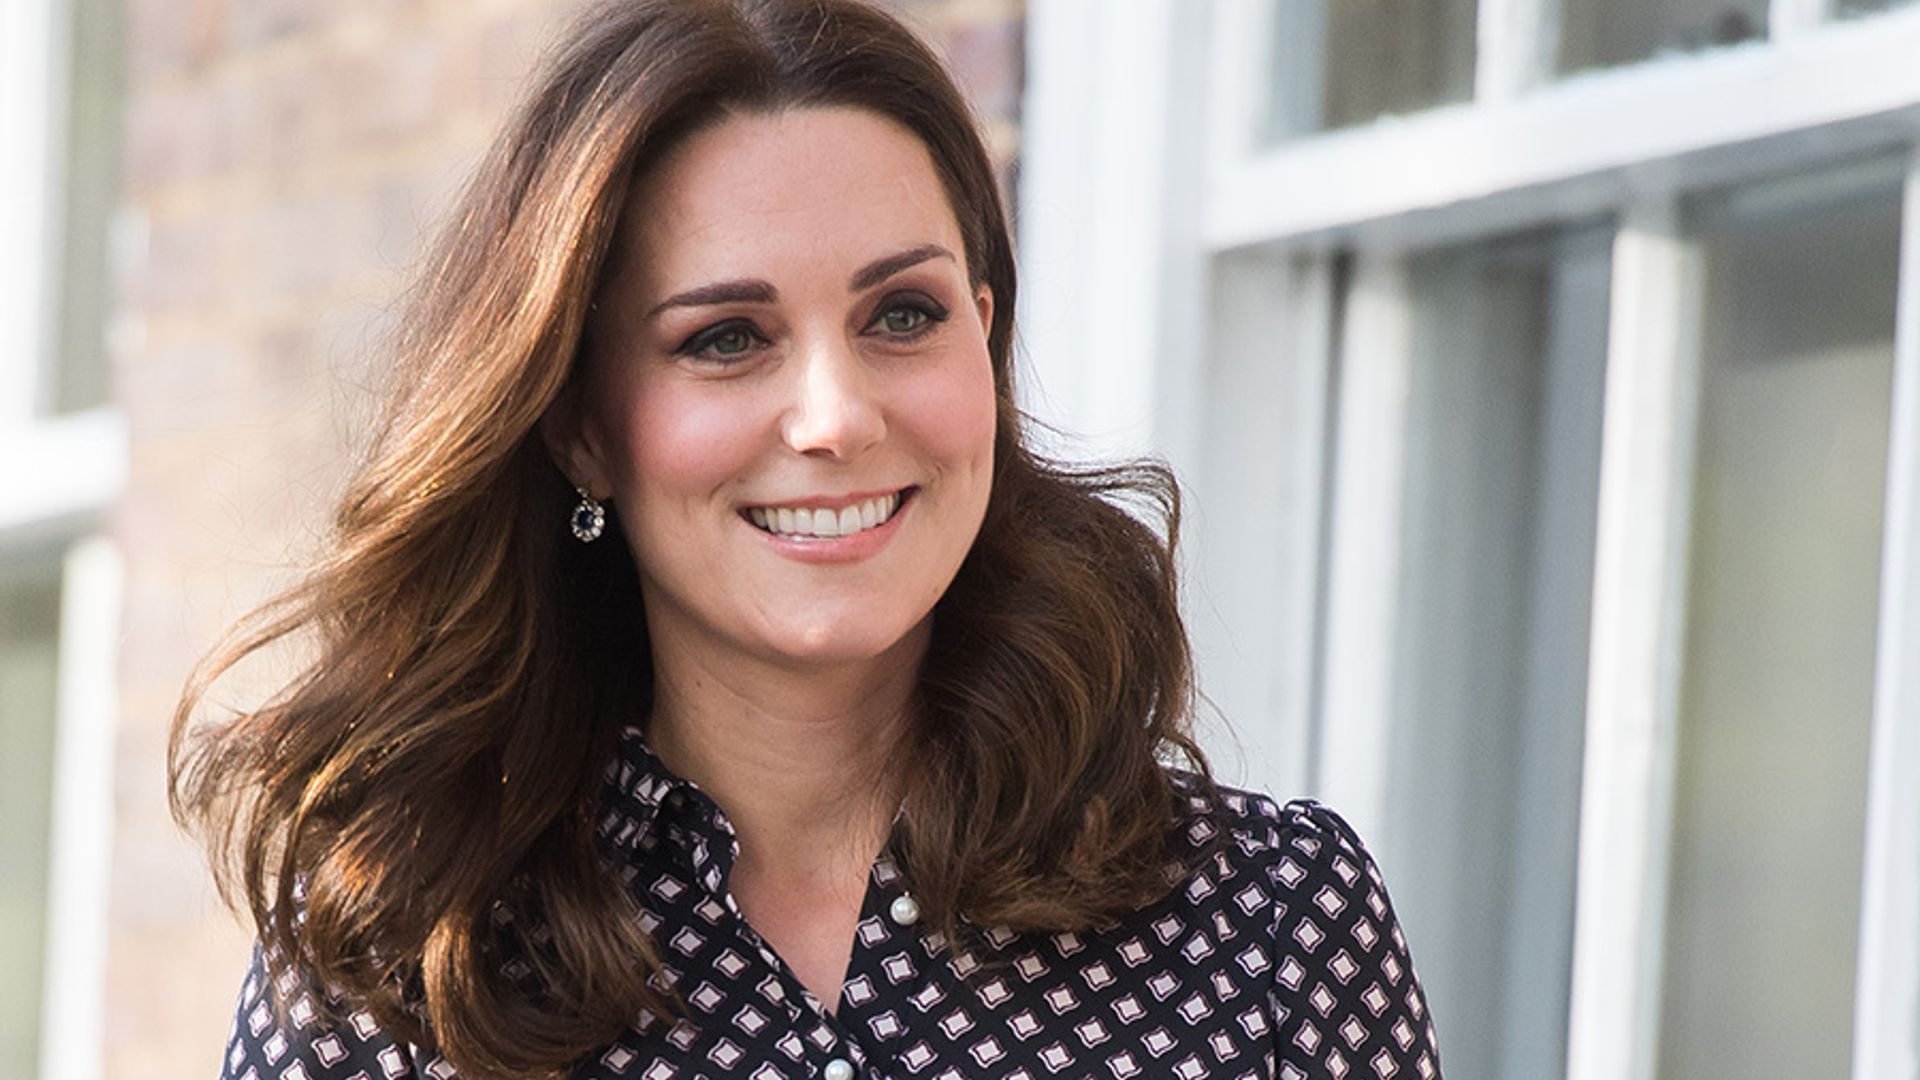 Kate Middleton: I'm 'absolutely thrilled' about Prince Harry's wedding news